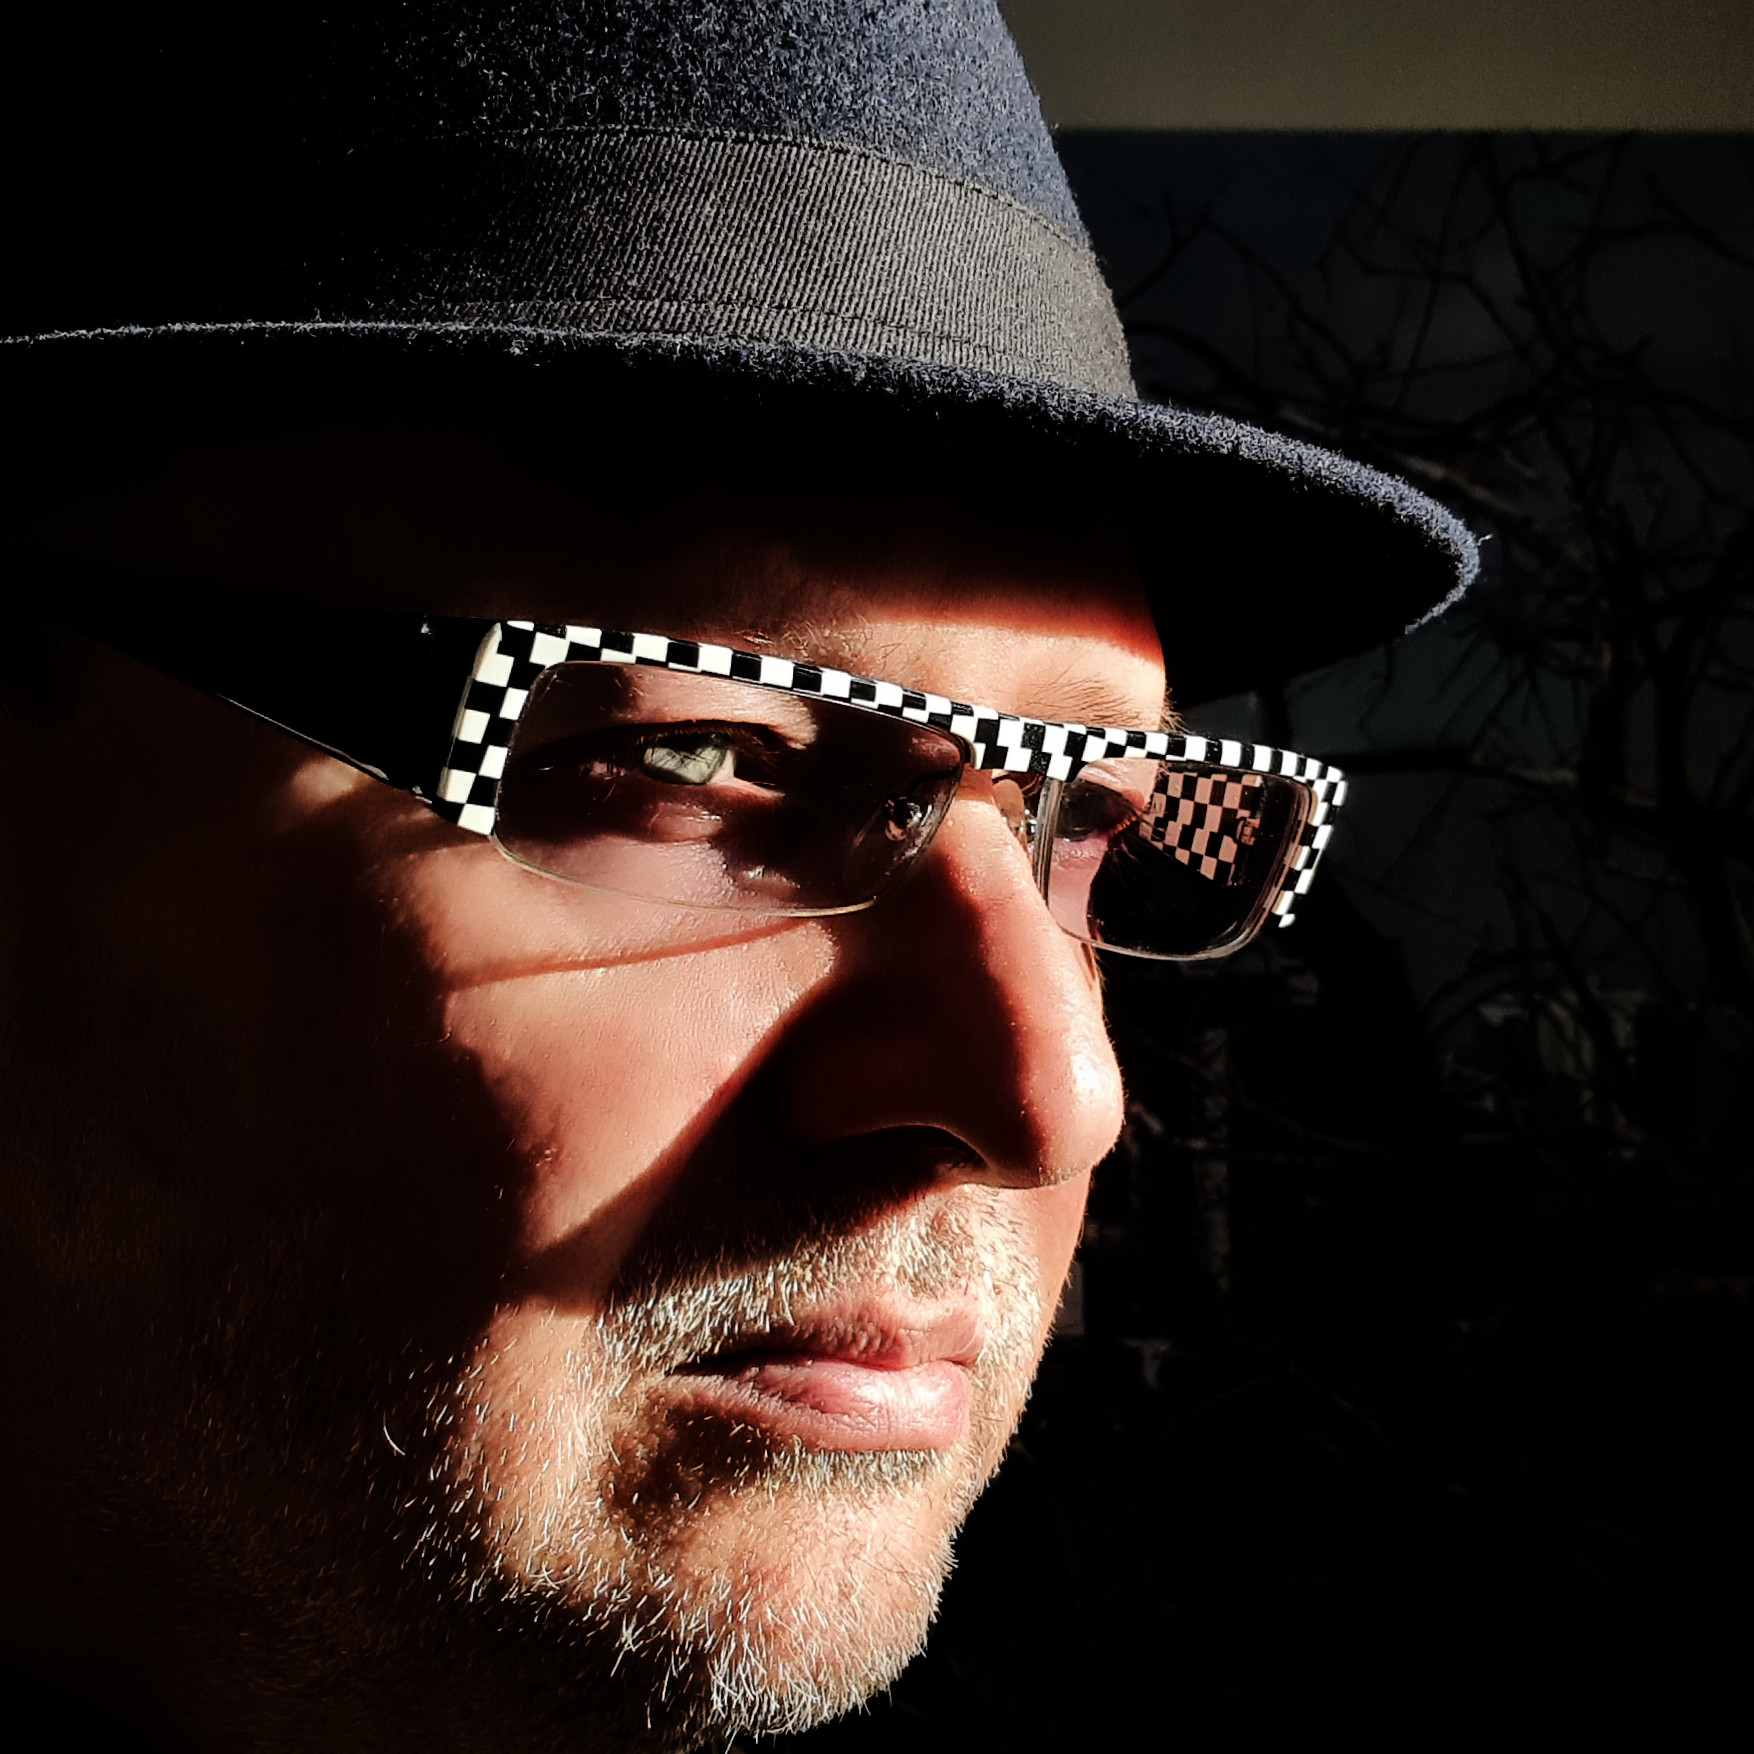 man's face with a hat on and checkered glases